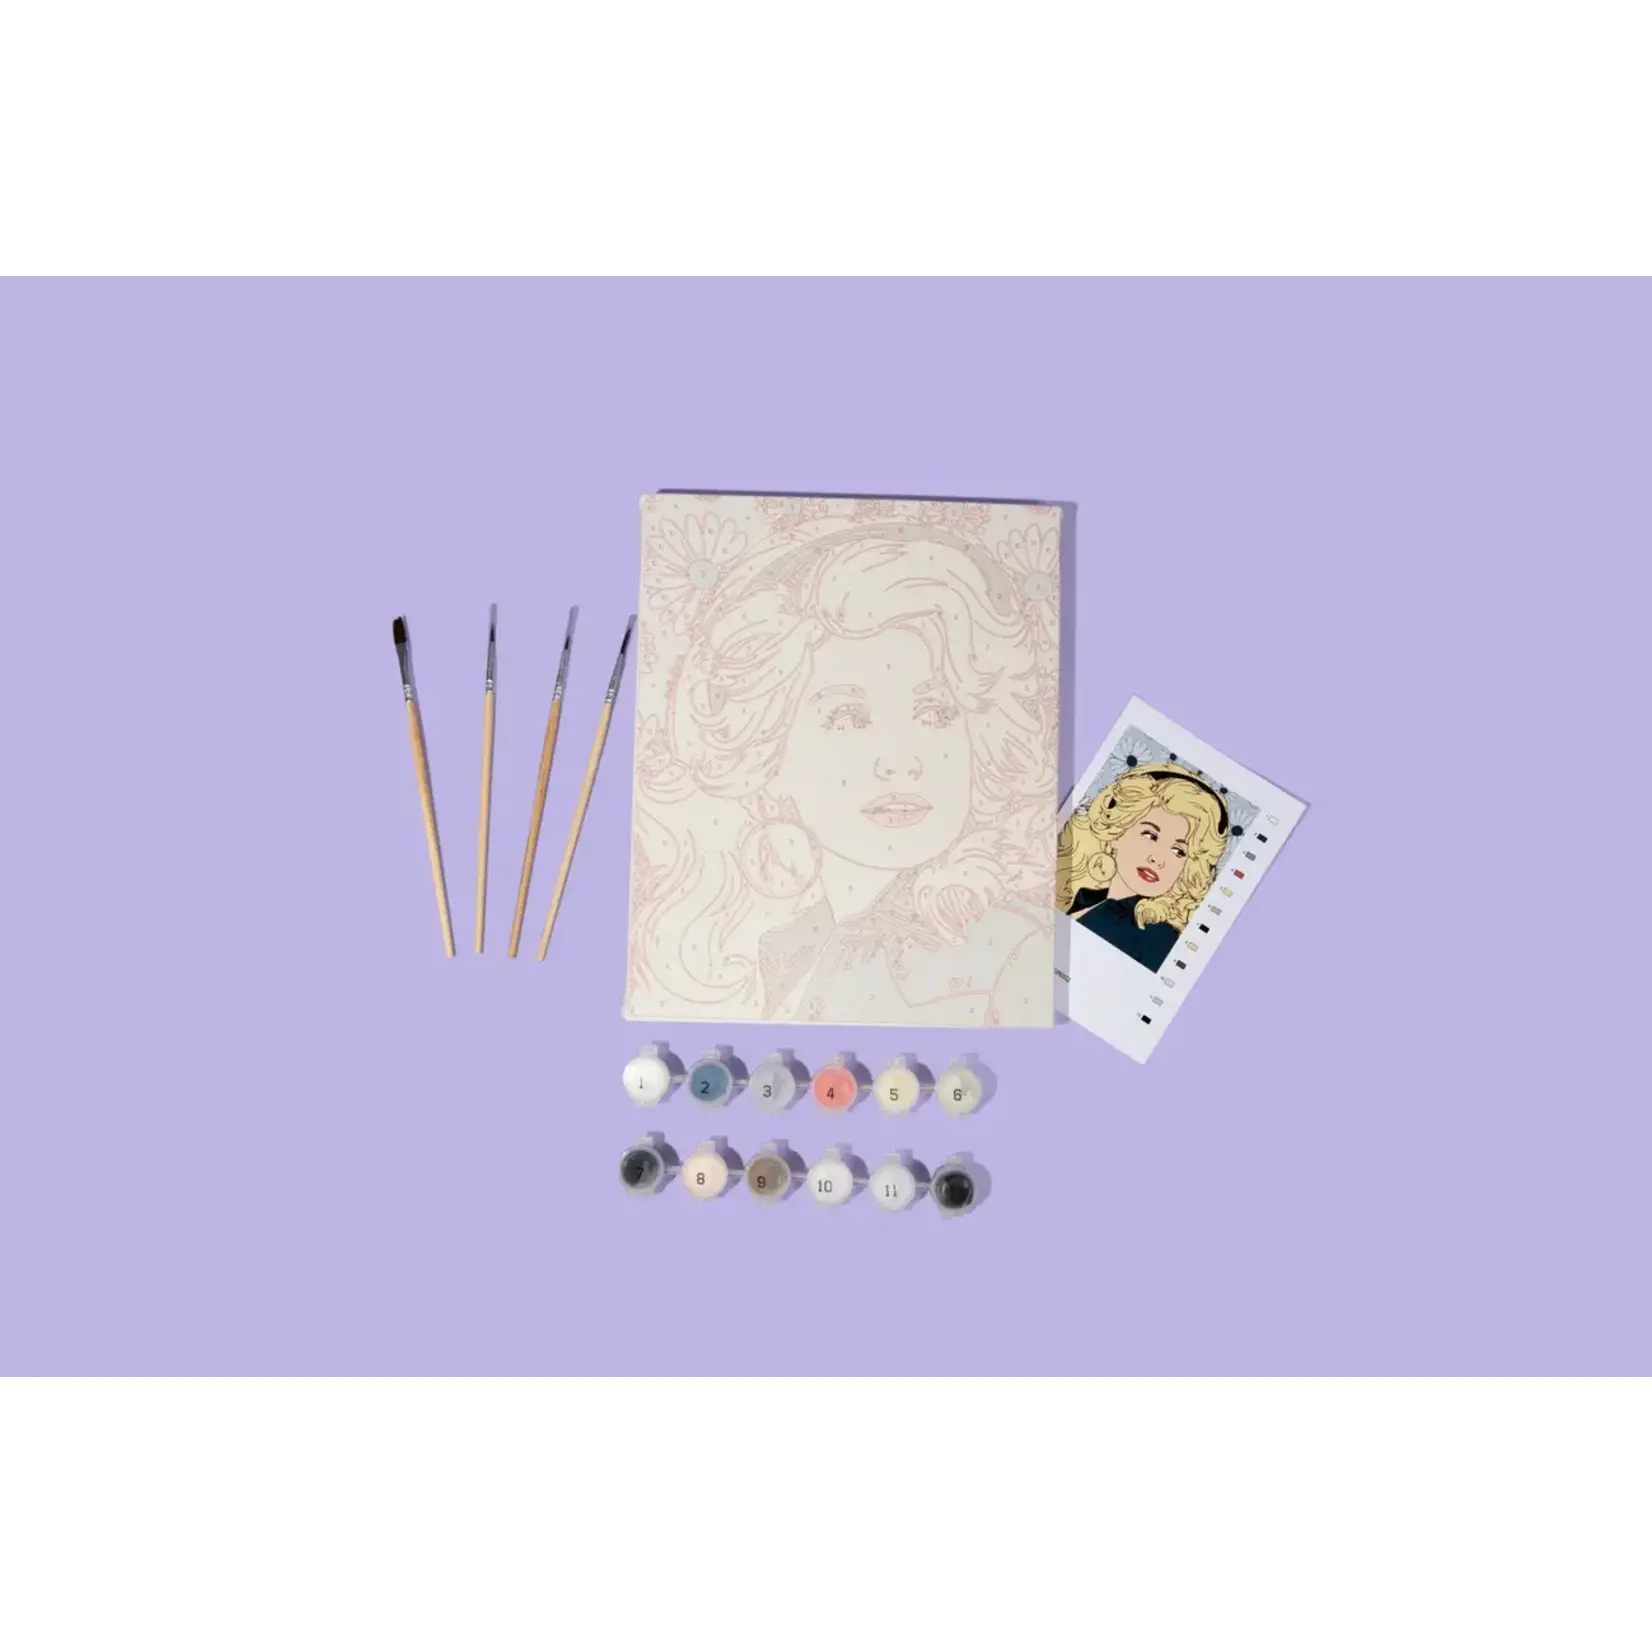 Sammy Gorin Paint By Numbers Kit, Dolly Parton